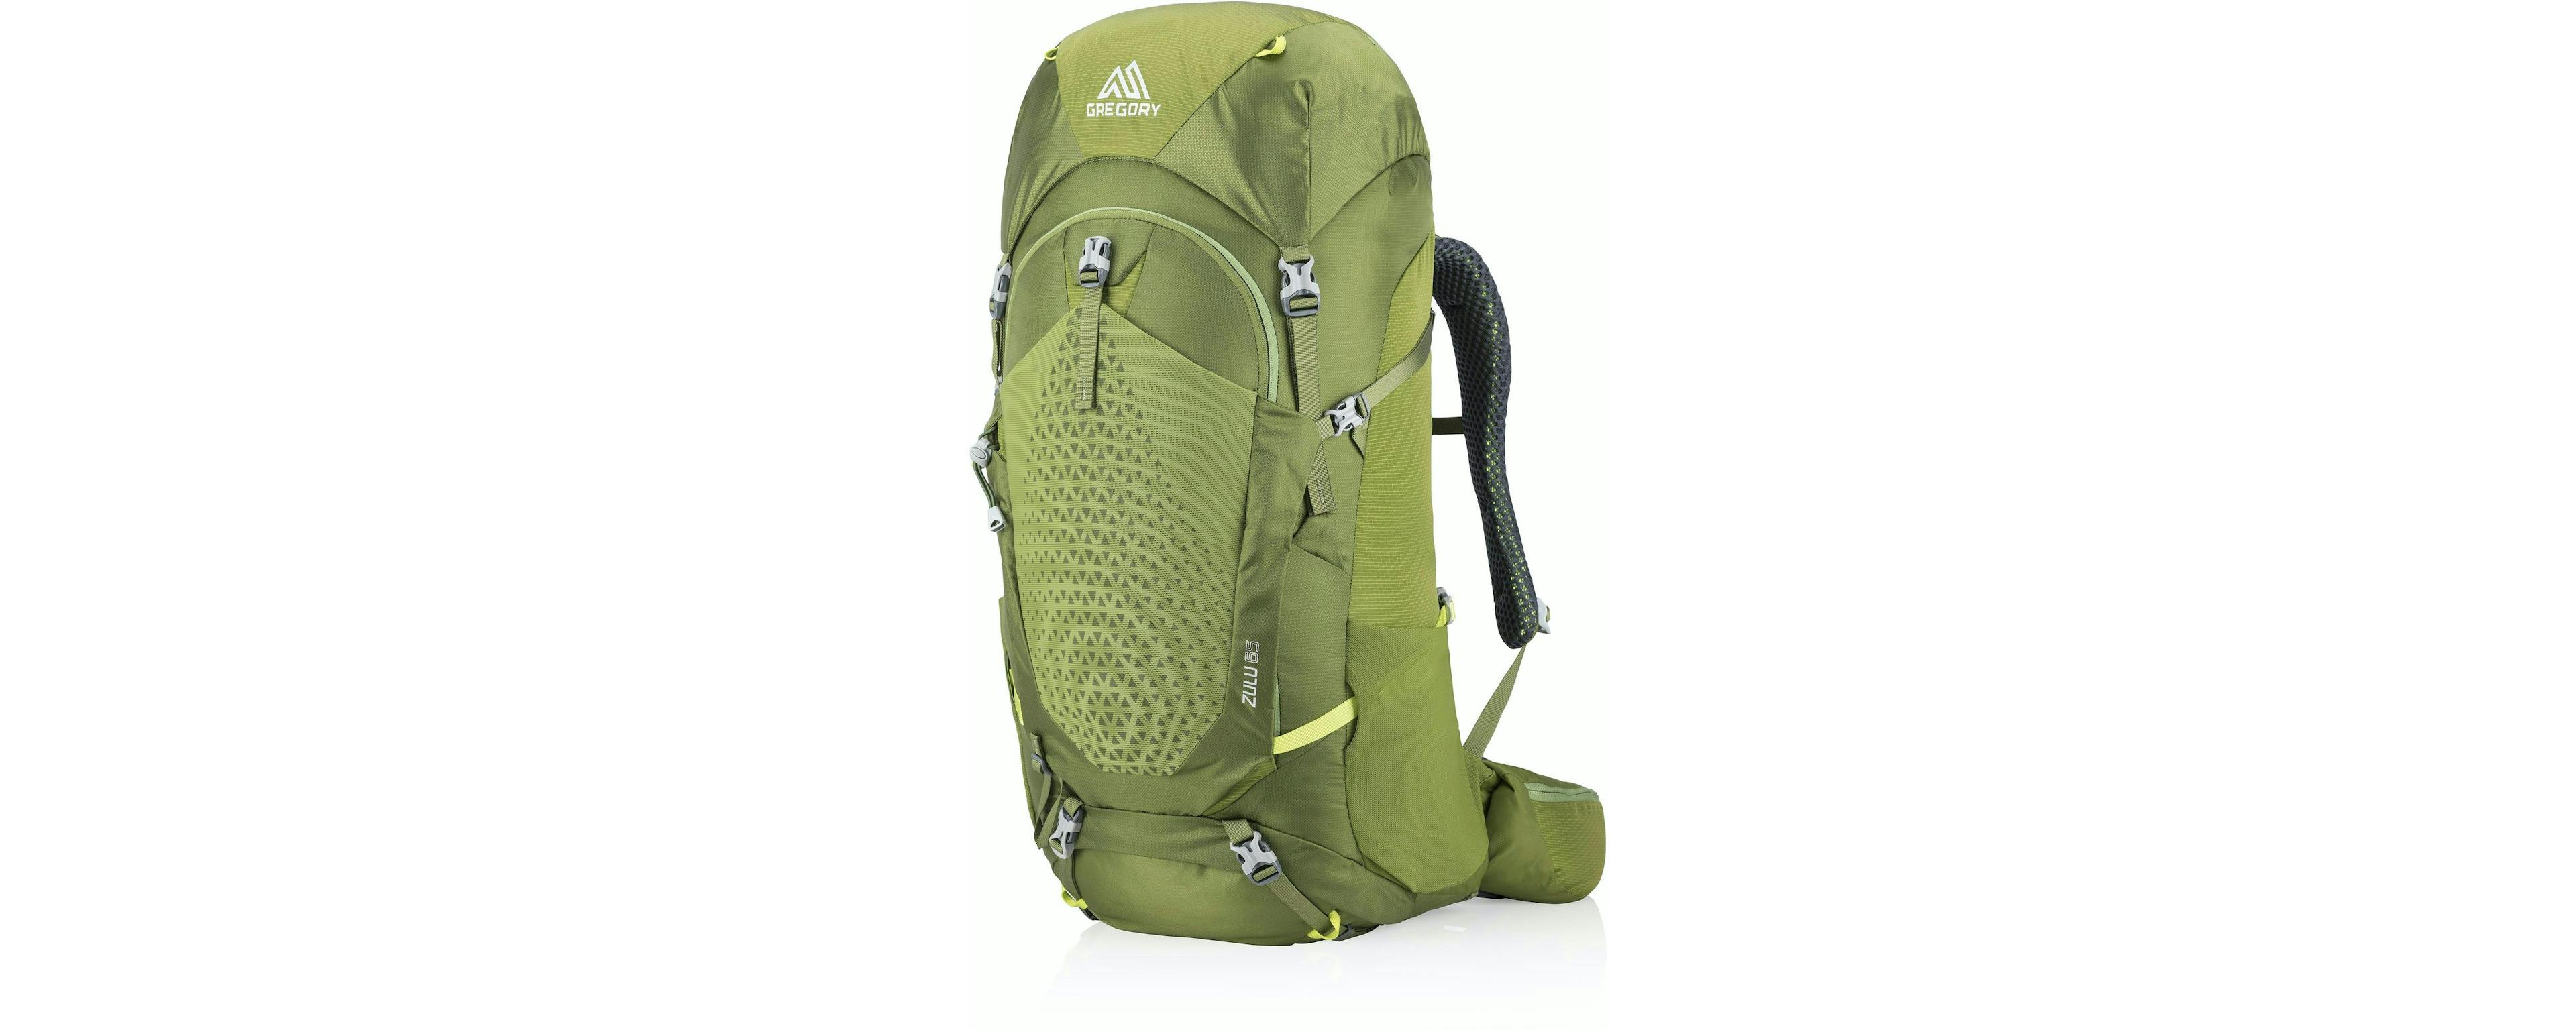 Green Gregory backpack